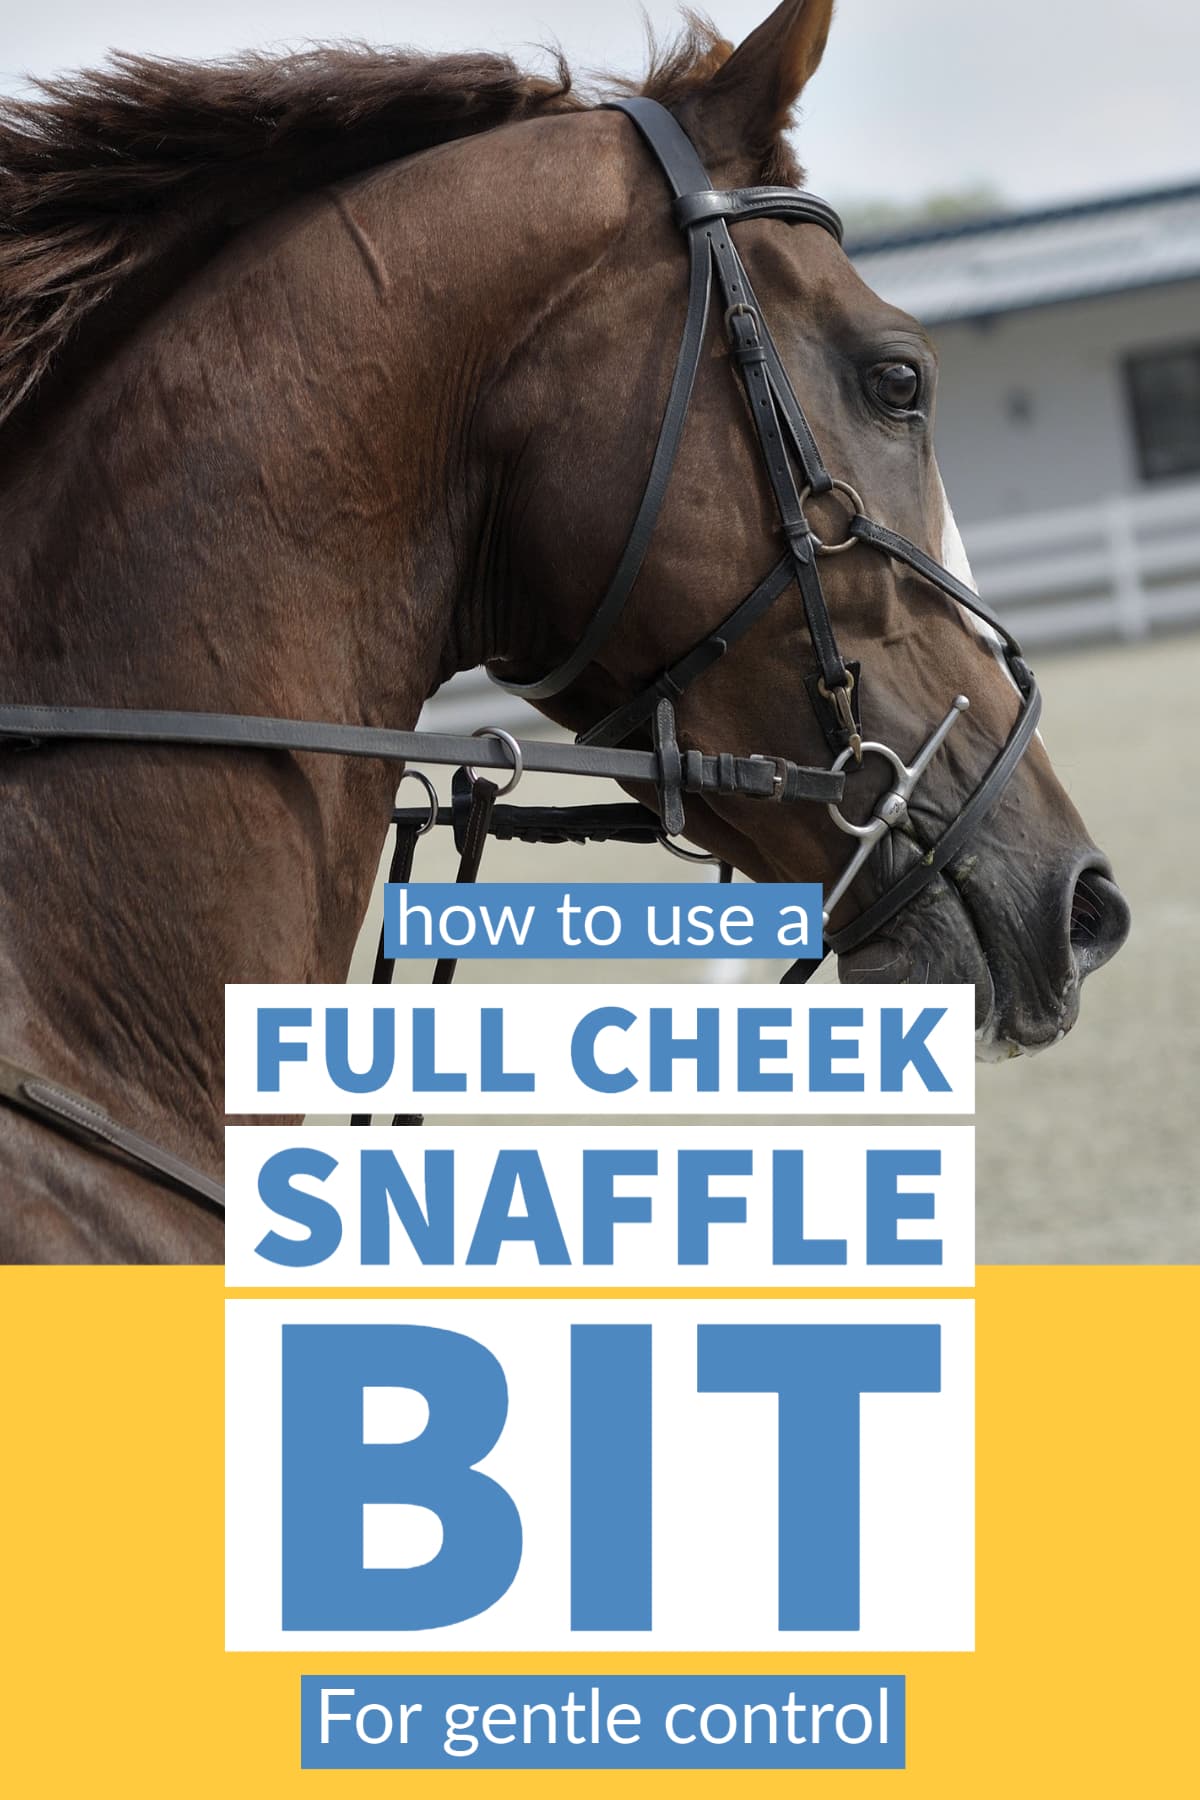 Photo of horse with text overlay: How and why to use a full cheeks and a full bit header graphic in blue and yellow.